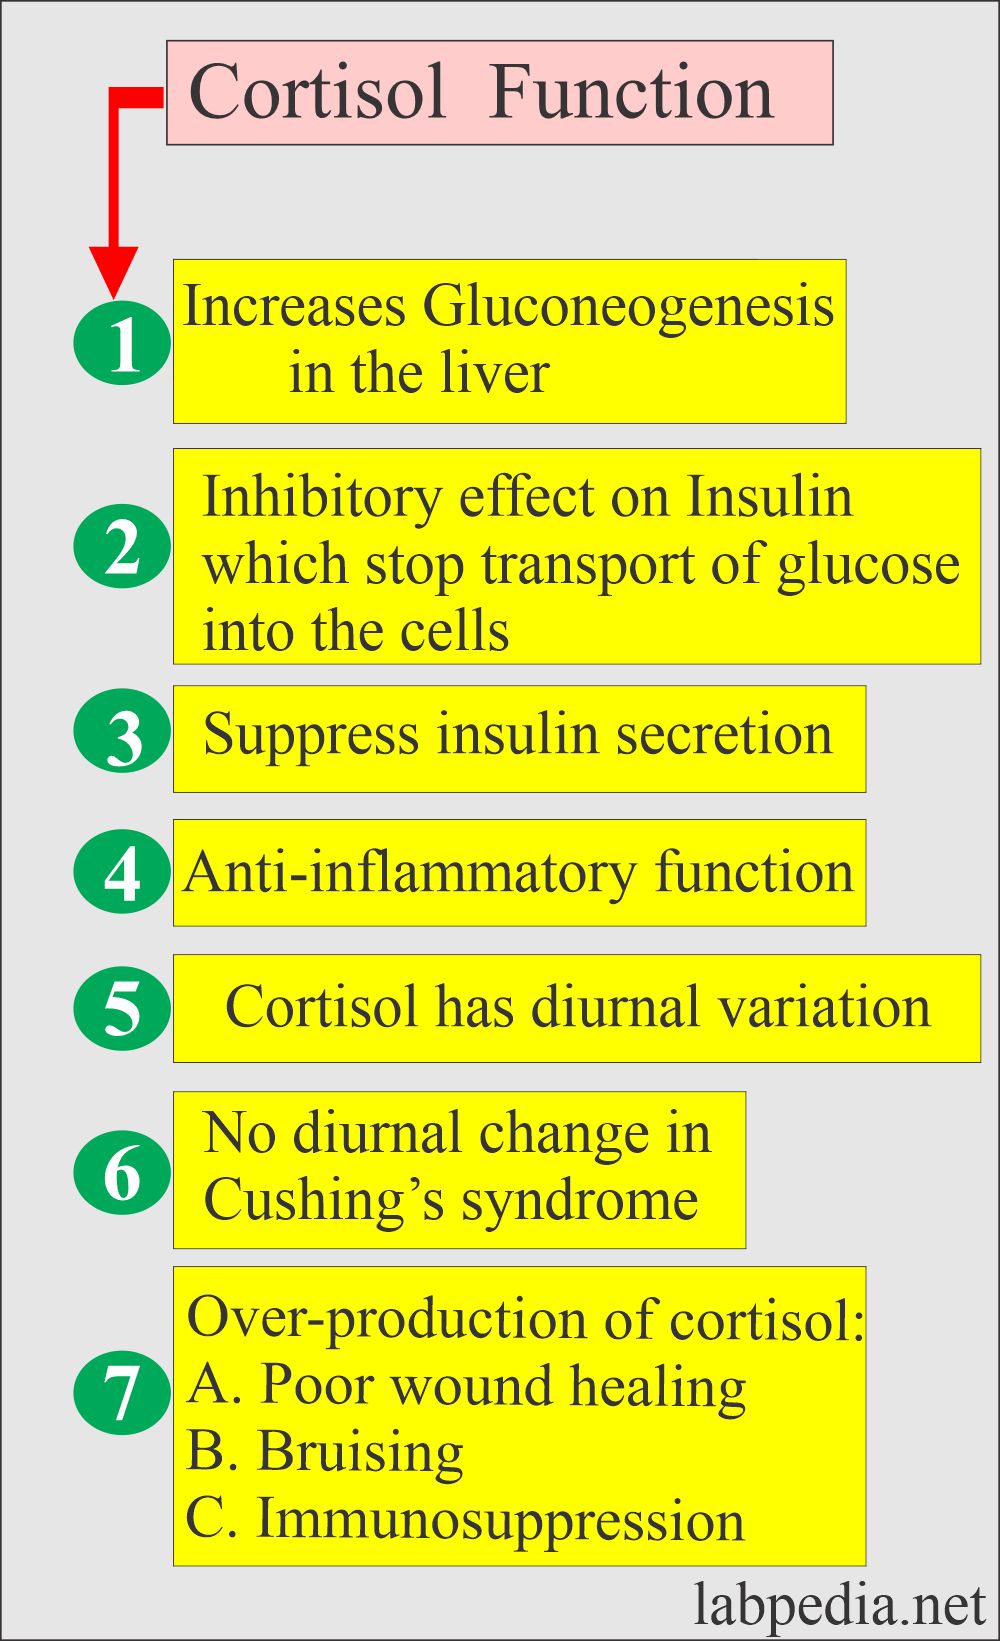 Cortisol functions